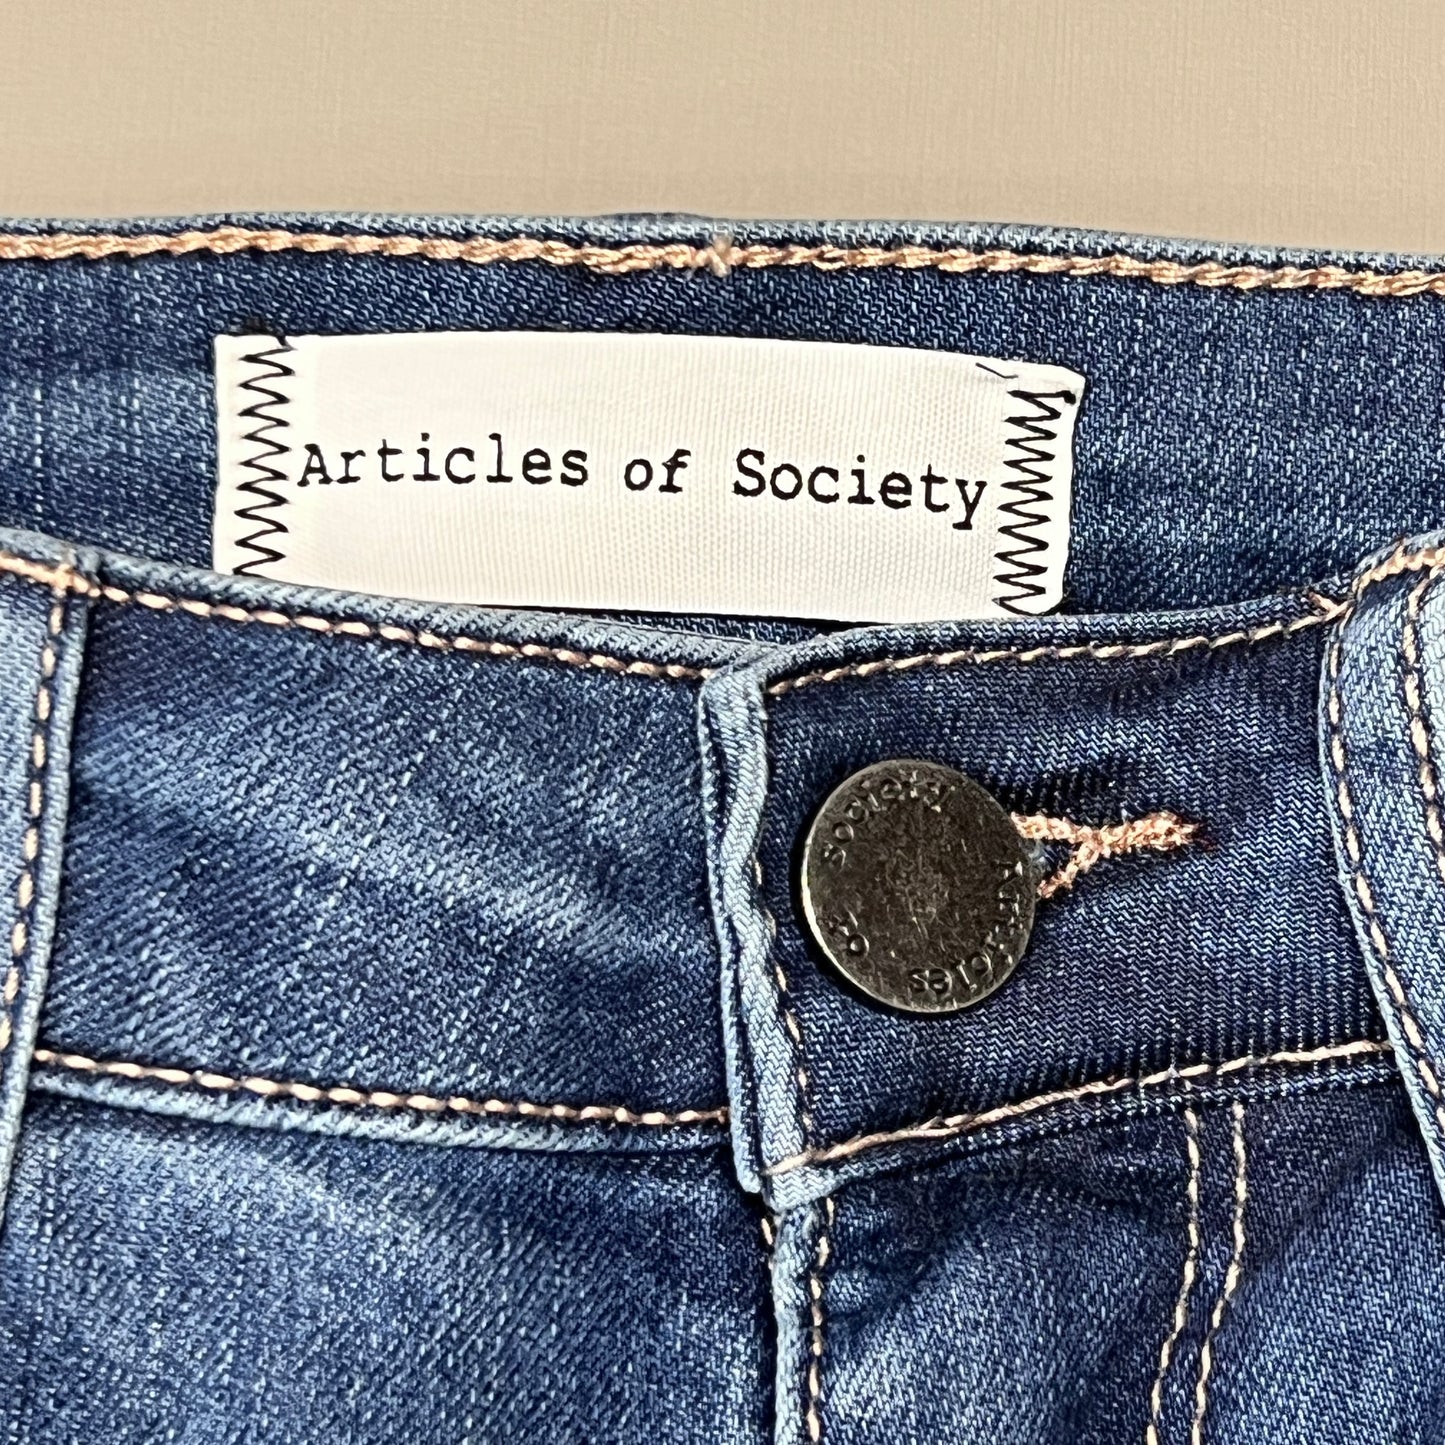 ARTICLES OF SOCIETY Pearl City Denim Jeans Women's Sz 24 Blue 4018PLV-712 (New)